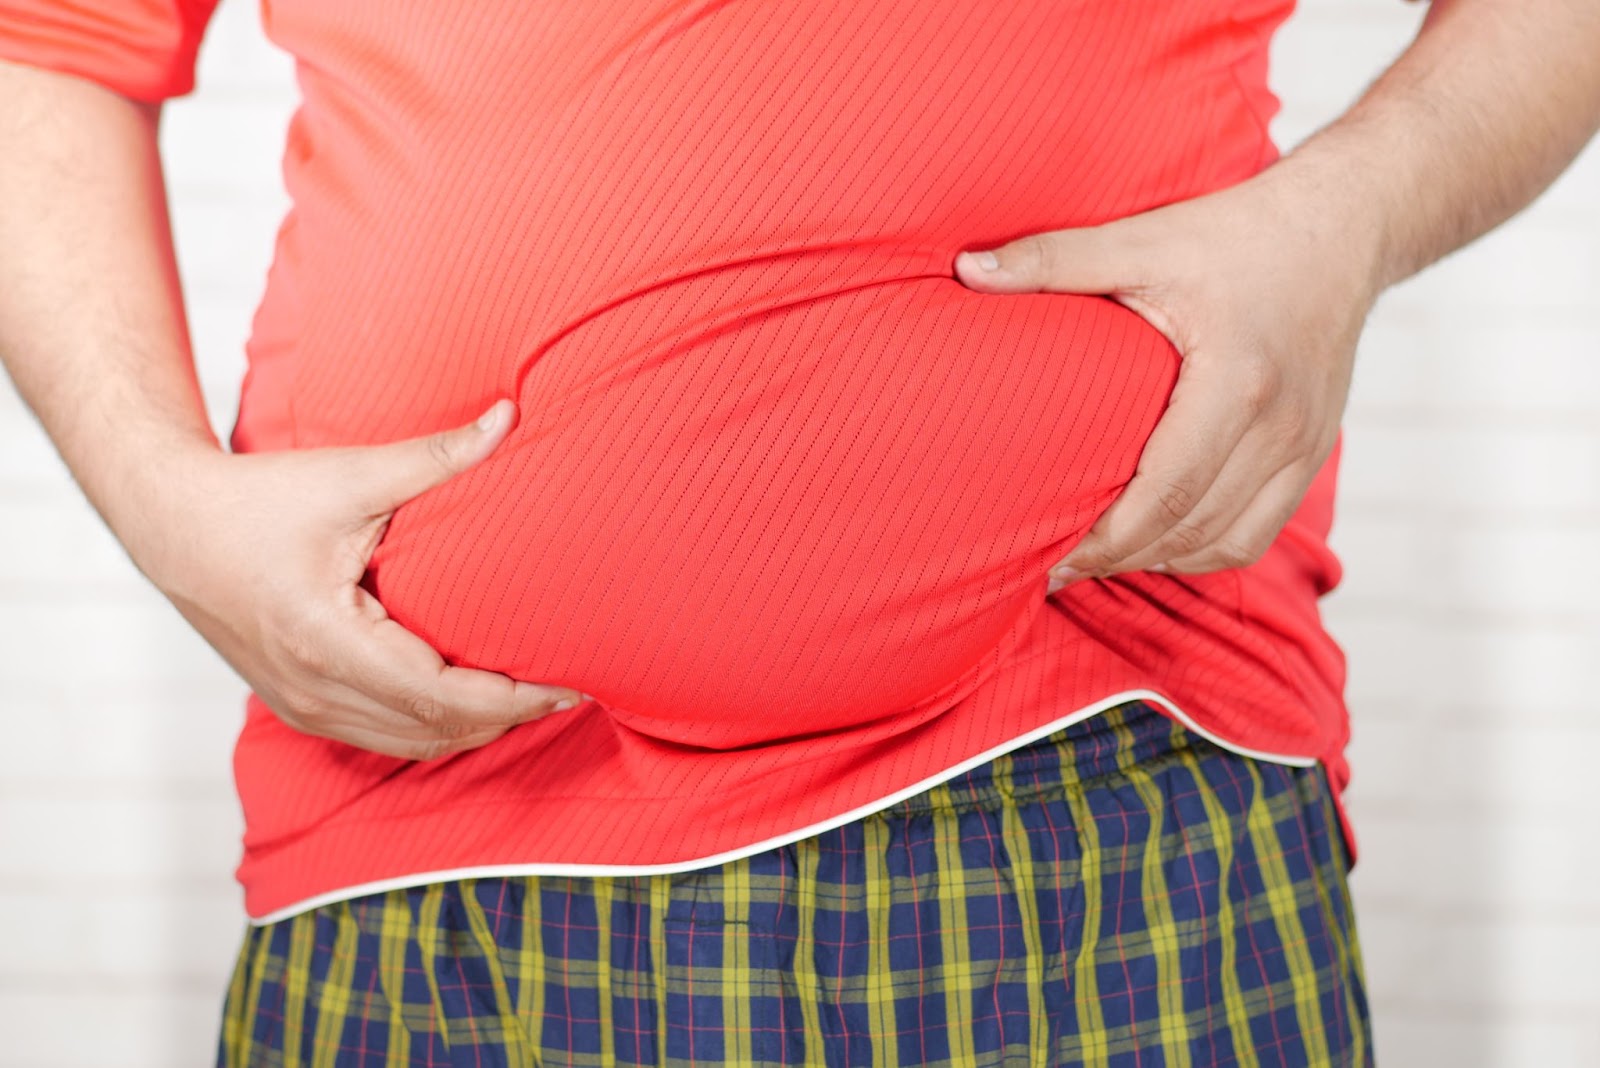 Beat the Bloat—Which Habits and Foods Cause Bloating?